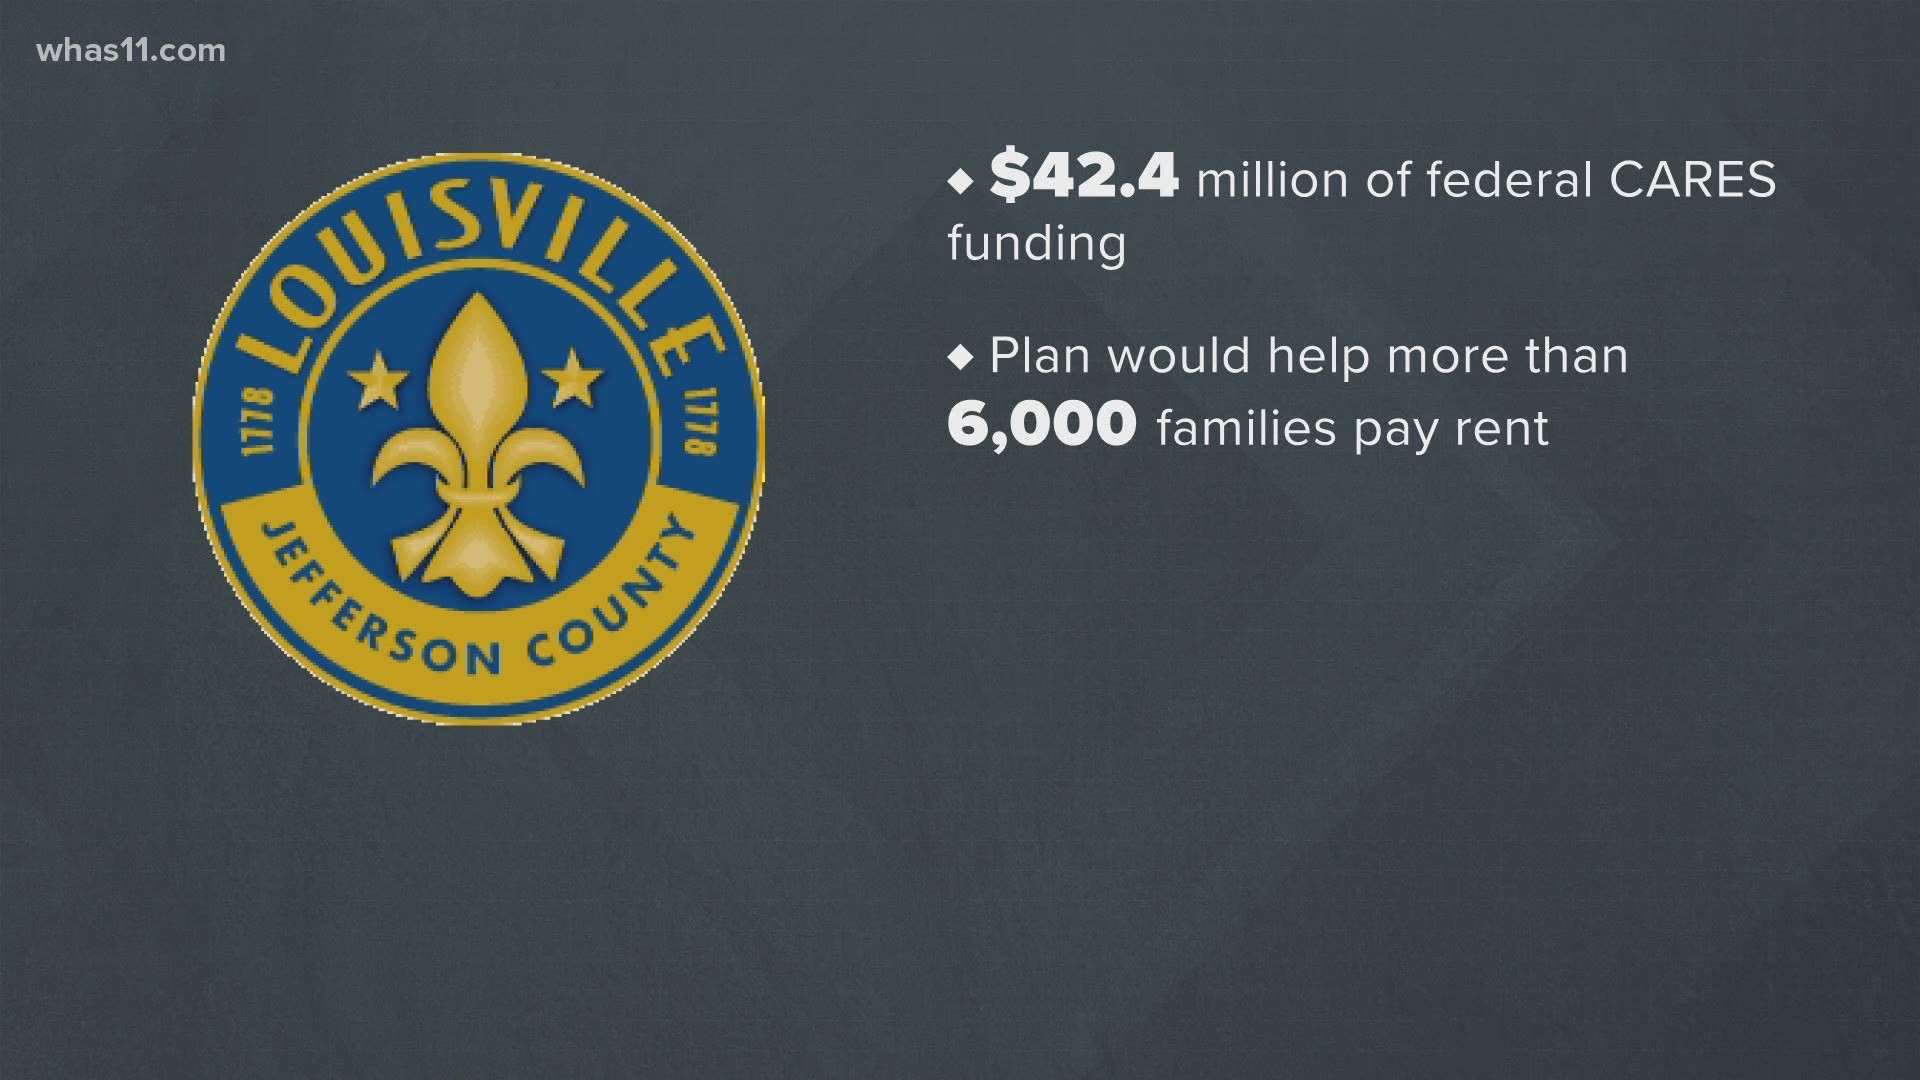 The city of Louisville has proposed using $42.4 million dollars in federal funding to help small businesses and prevent evictions.